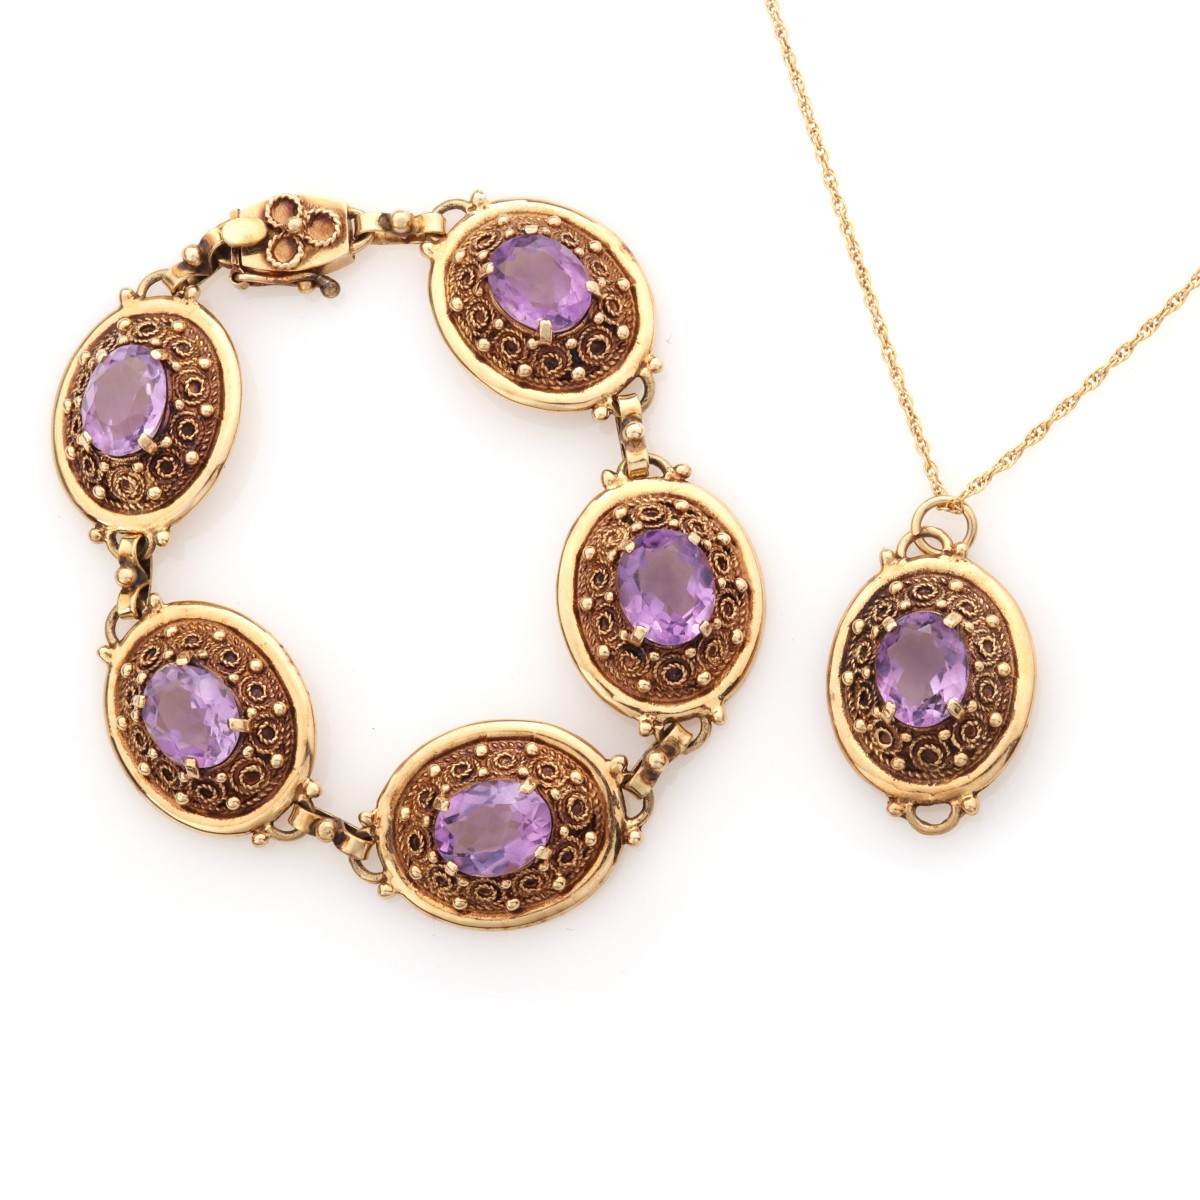 A 14K GOLD AND AMETHYST BRACELET AND PENDANT SET